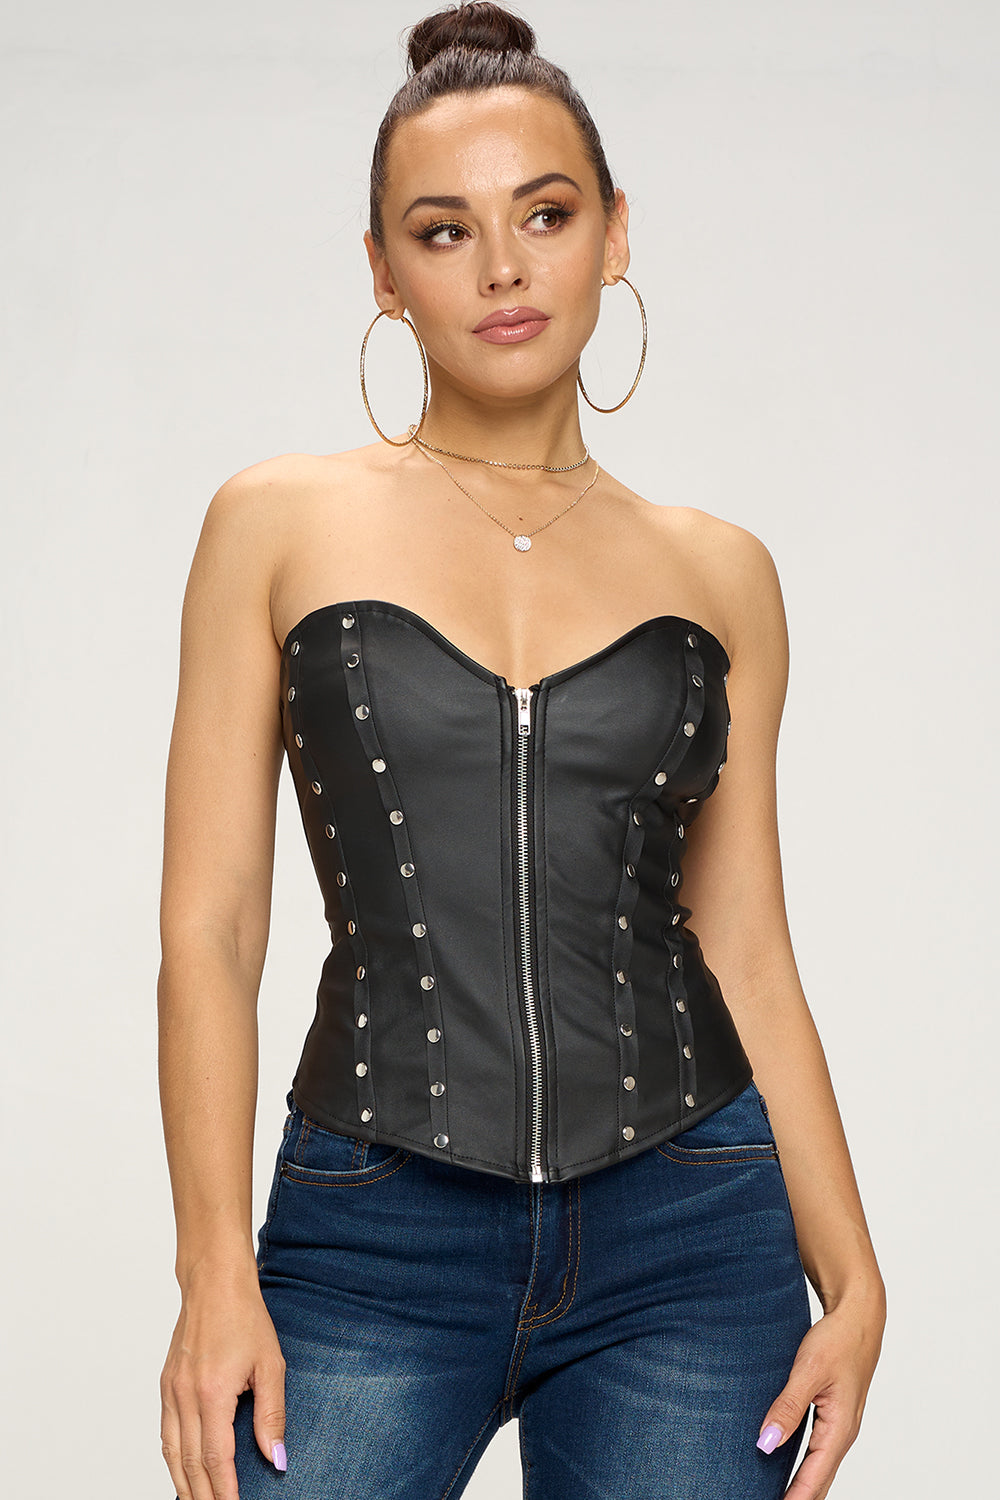 Find your corset top today in our Online Corset Shop